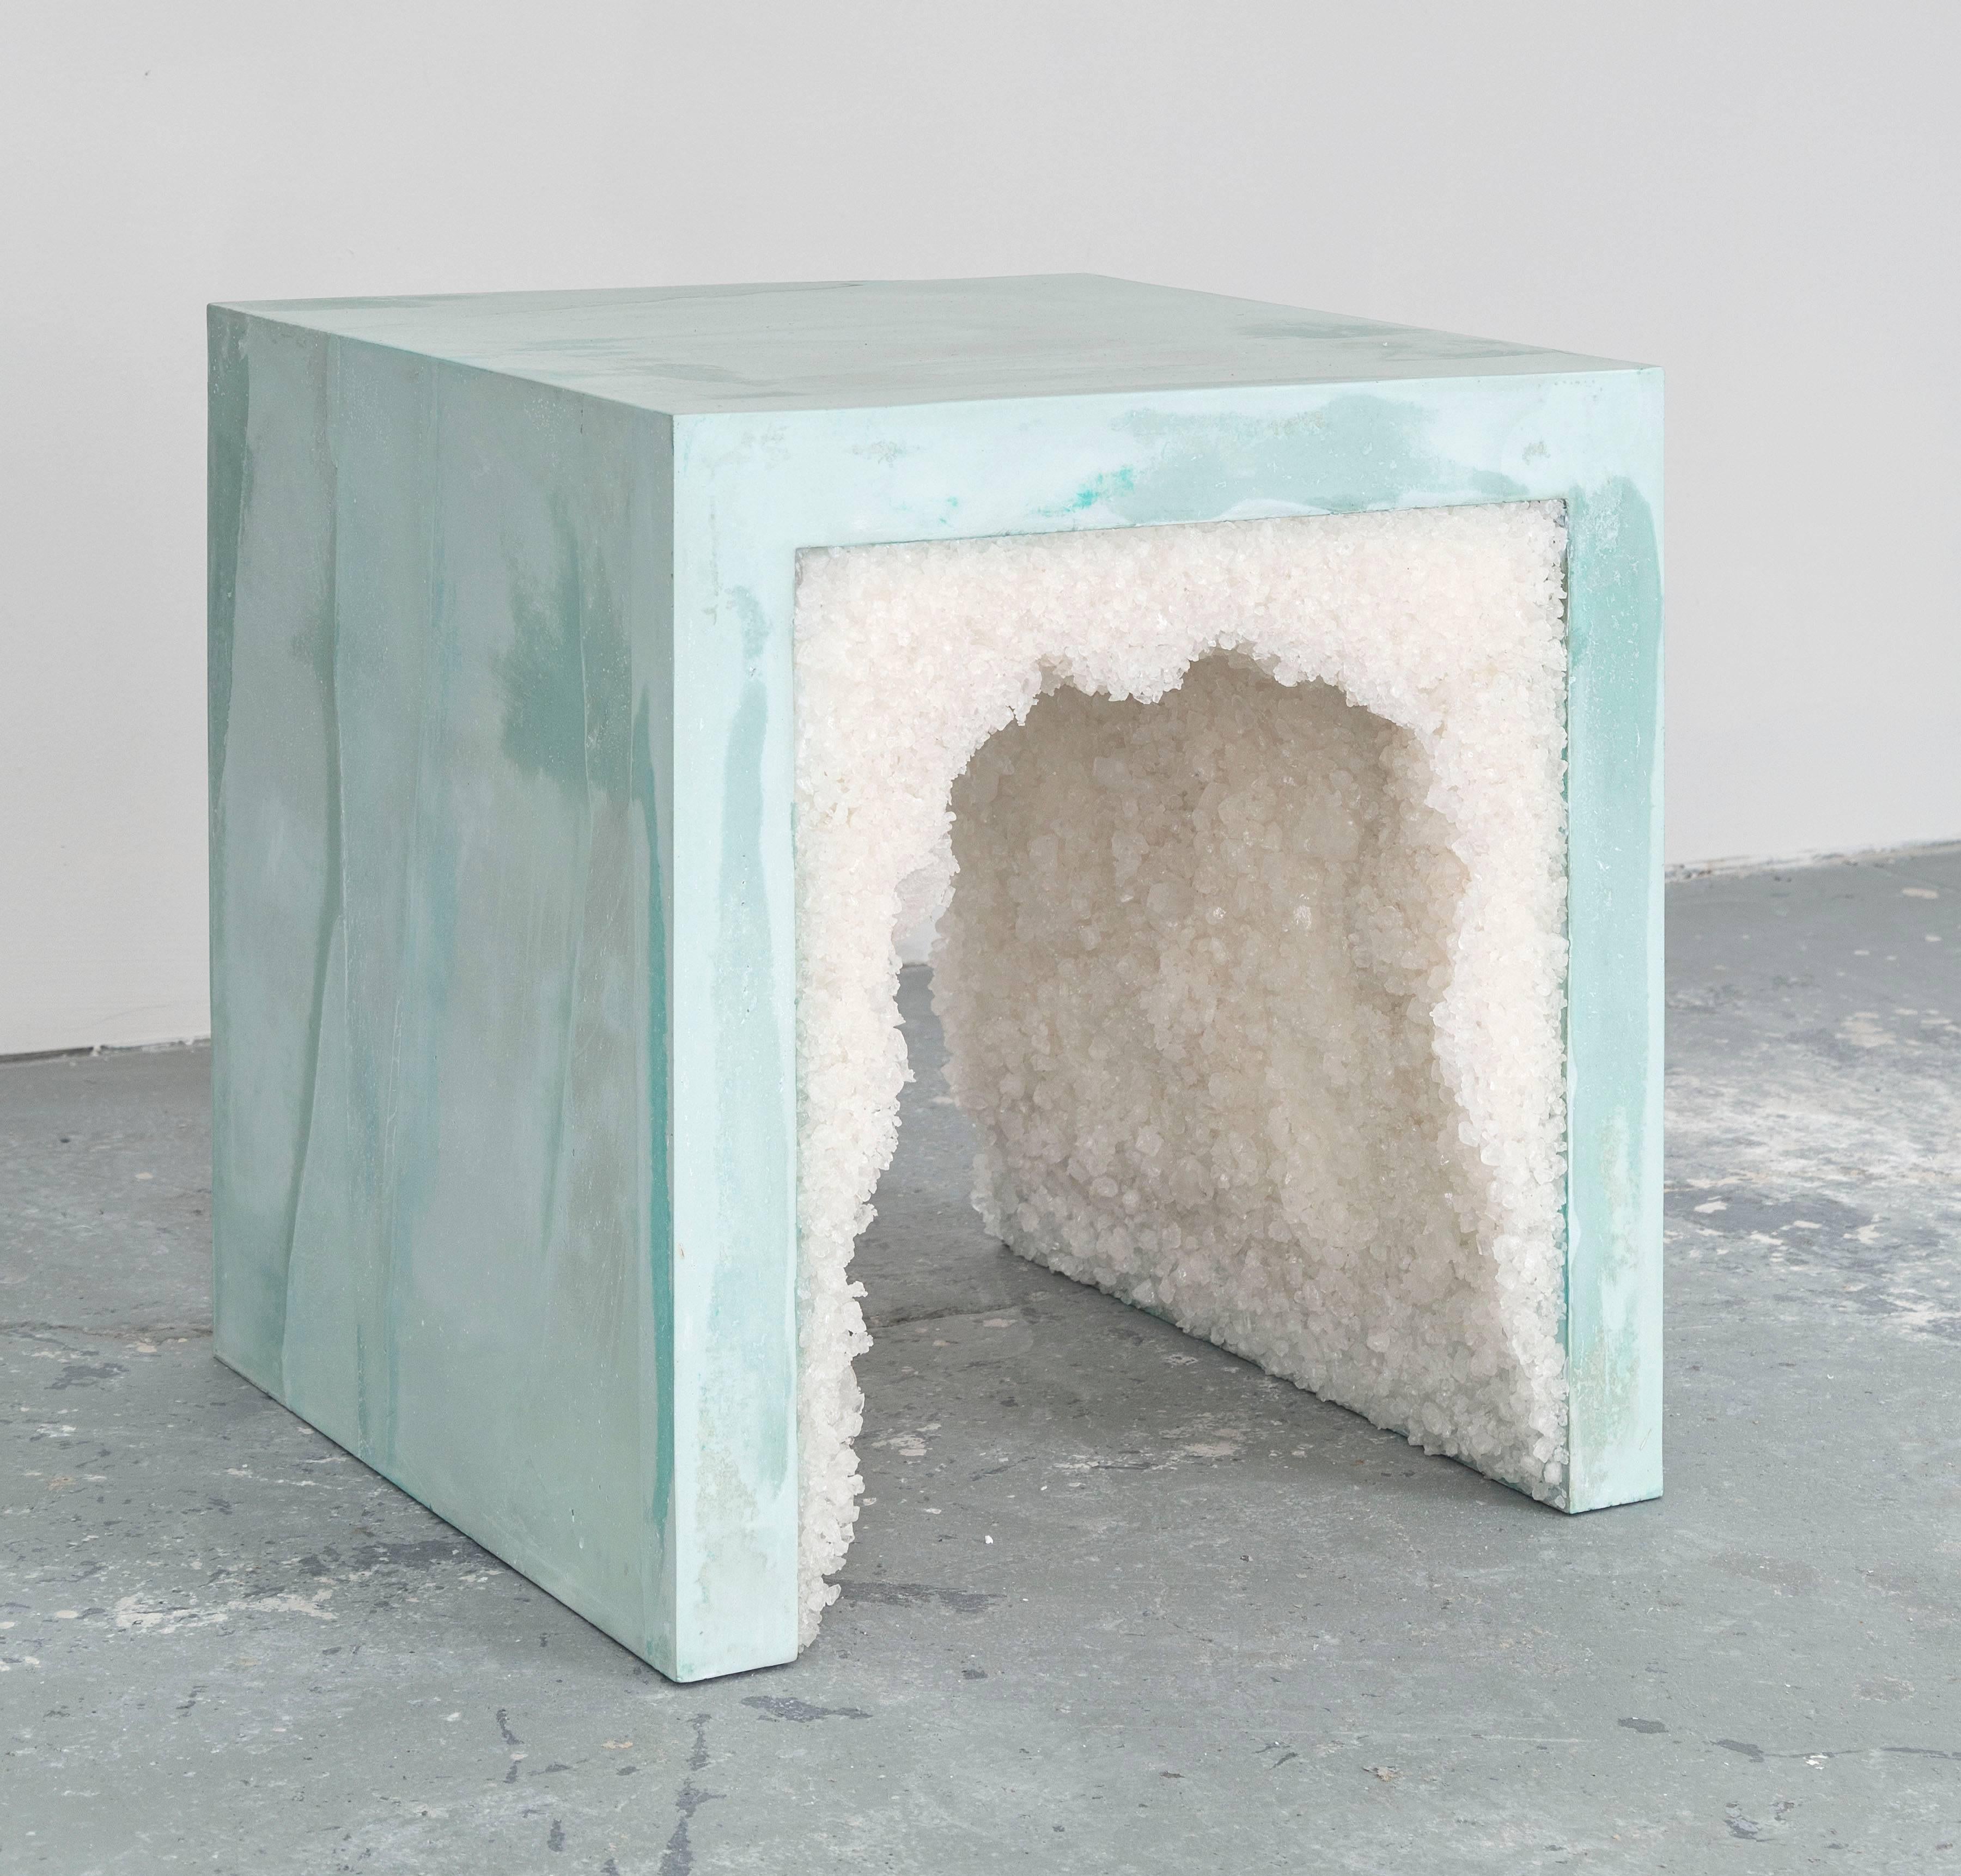 Composed from a combination of materials, the angular side table consists of a hand-dyed cement exterior and a white rock salt interior. Packed by hand within the smooth ombre of celadon cement, the granules form an organic texture to contrast the